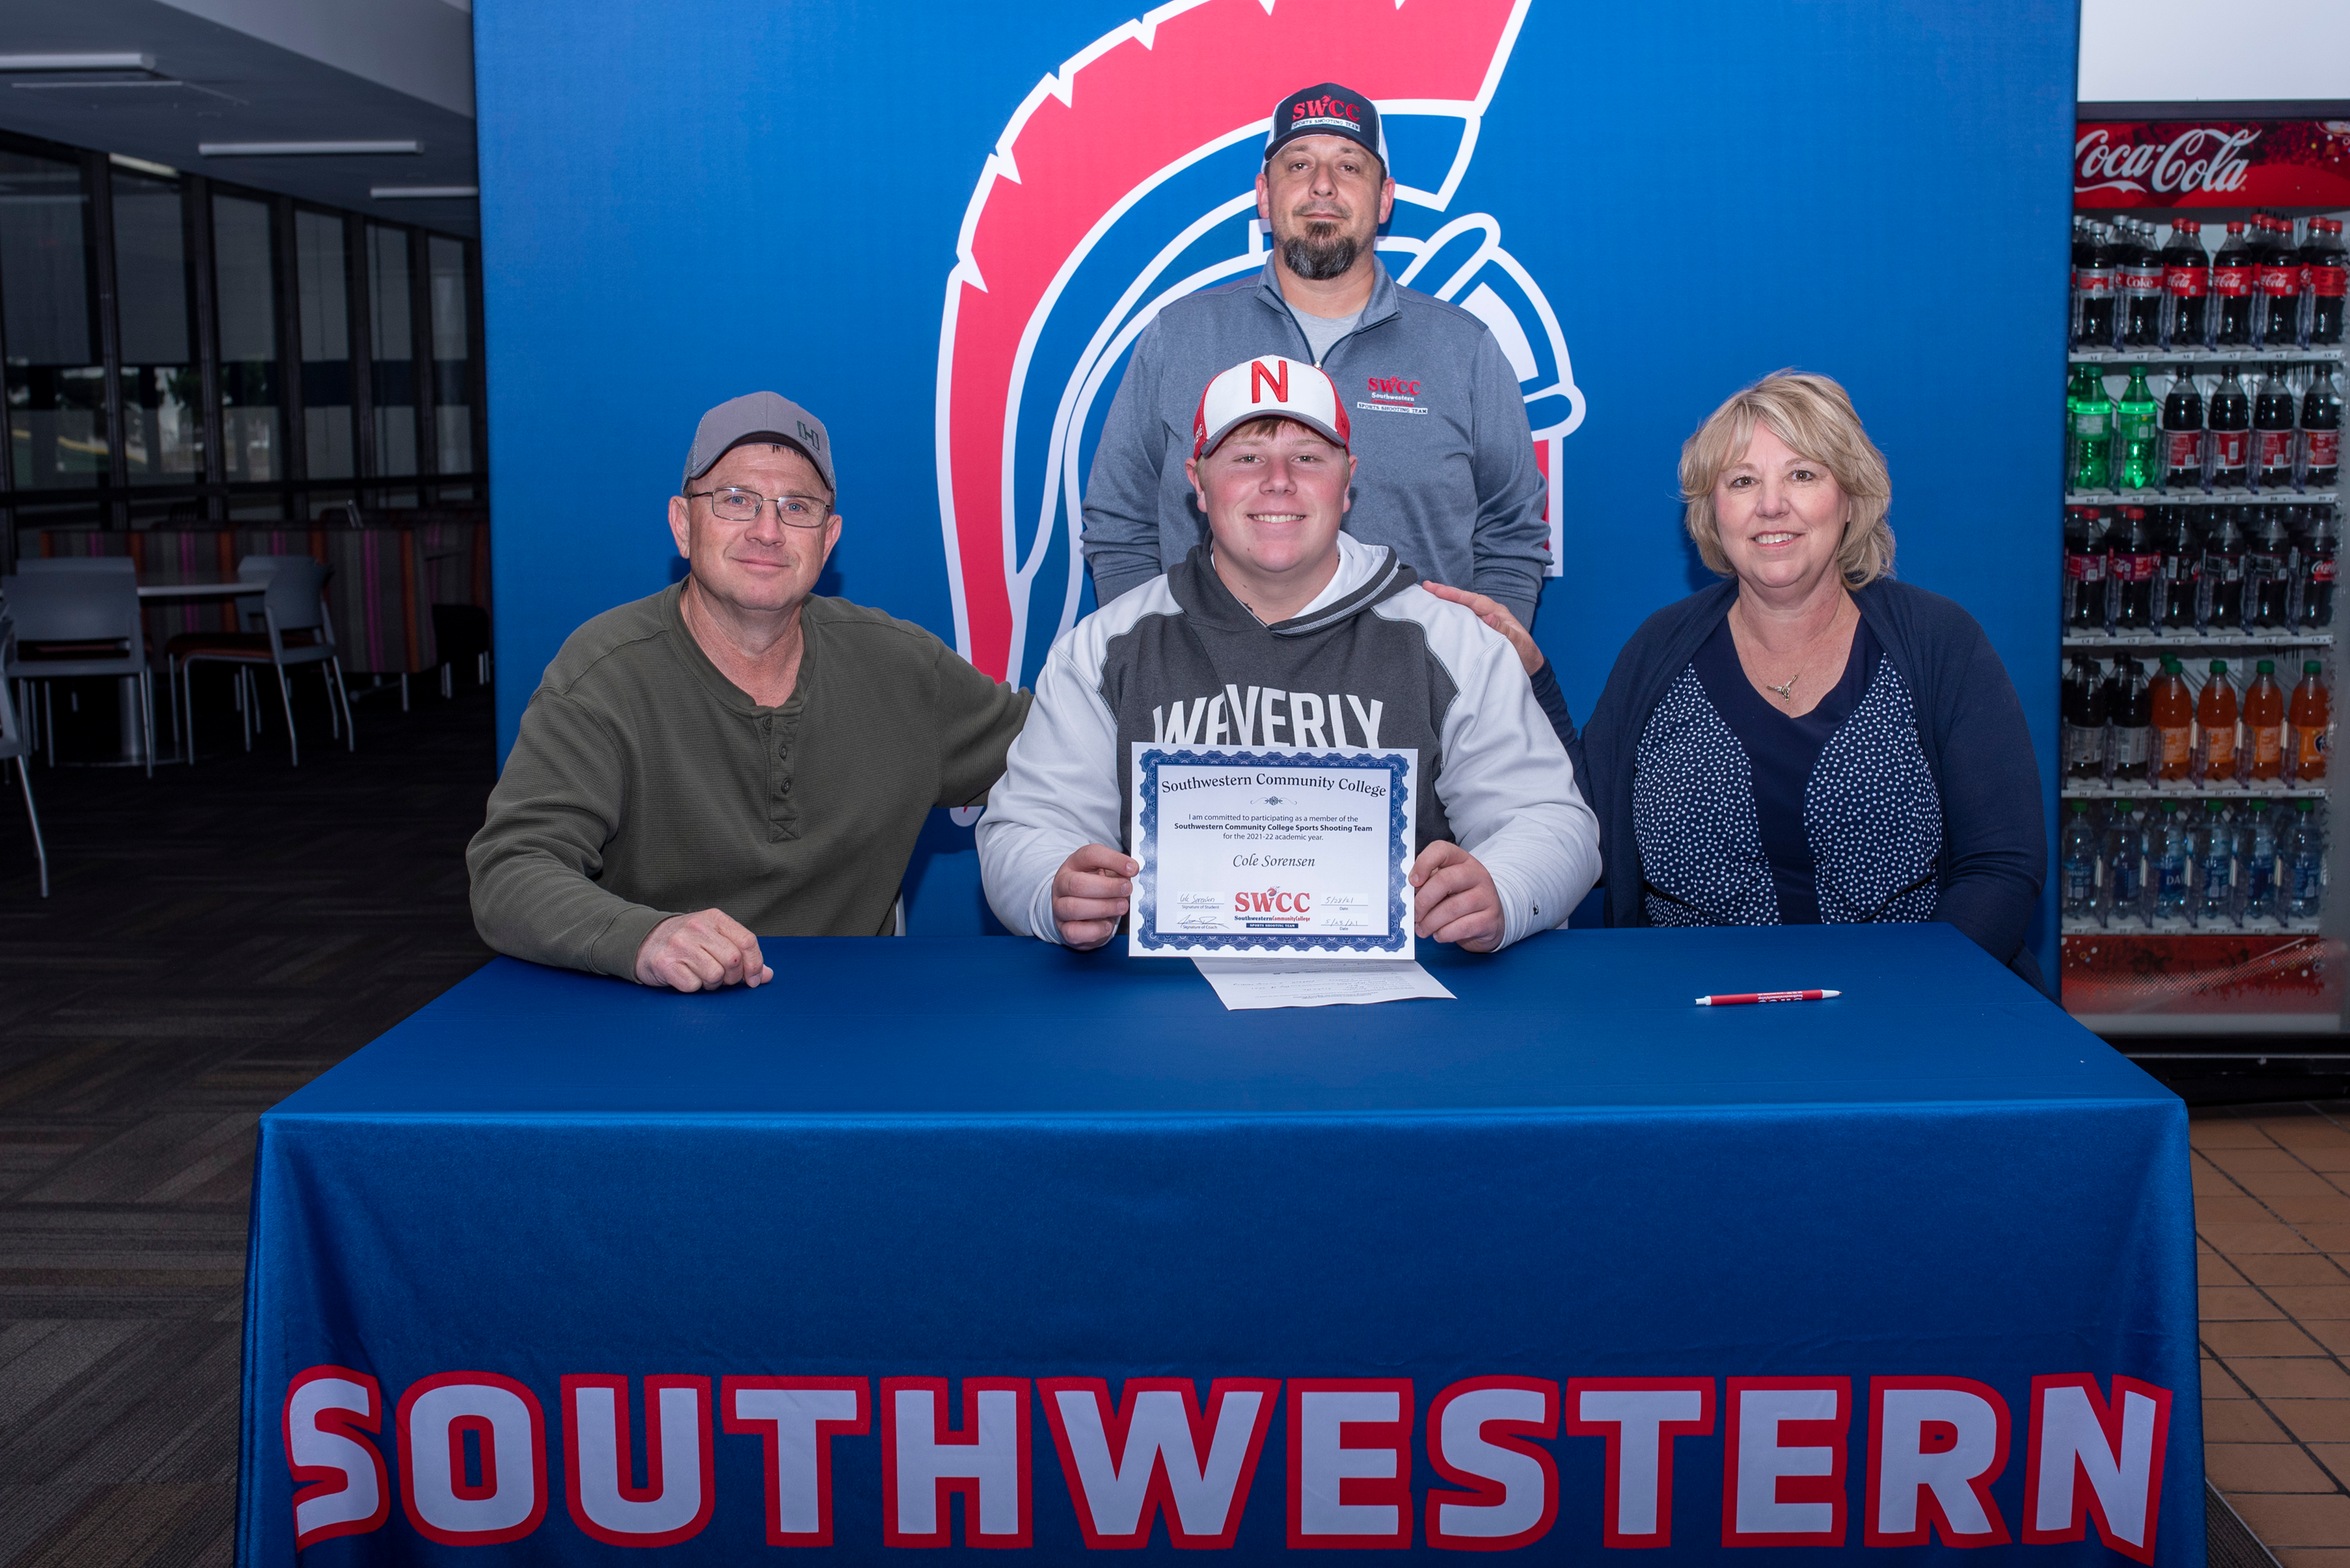 Cole Sorensen signs his National Letter of Intent to join the Southwestern sports shooting team in the fall. Sorensen is joined by his parents Dudley and Jichelle, as well as Southwestern Sports Shooting Coach Josh Purdy.